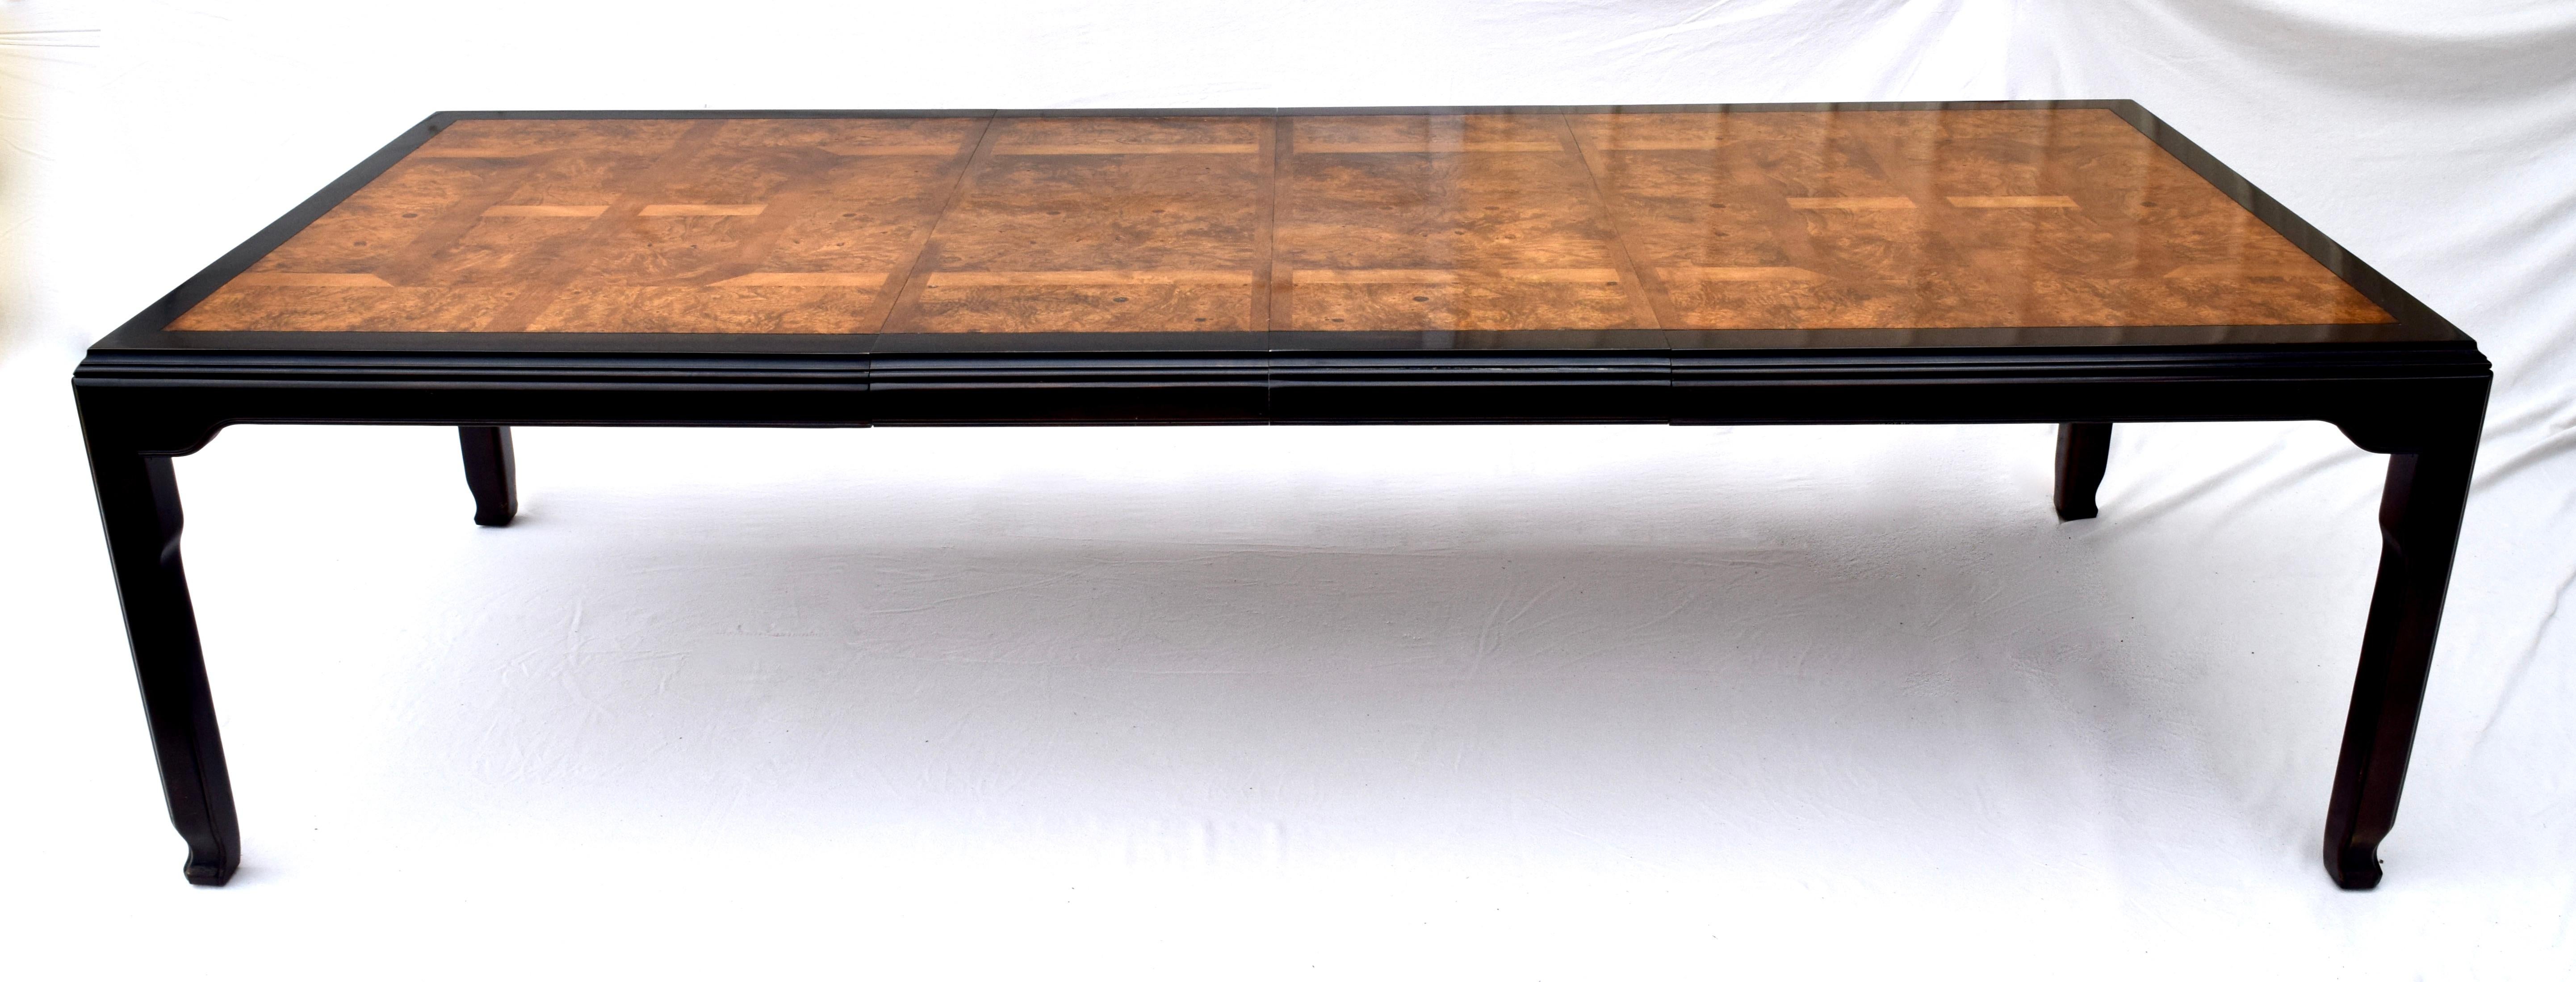 Chinoiserie Dining Table by Raymond Sabota for Century Furniture Chin Hua Collection